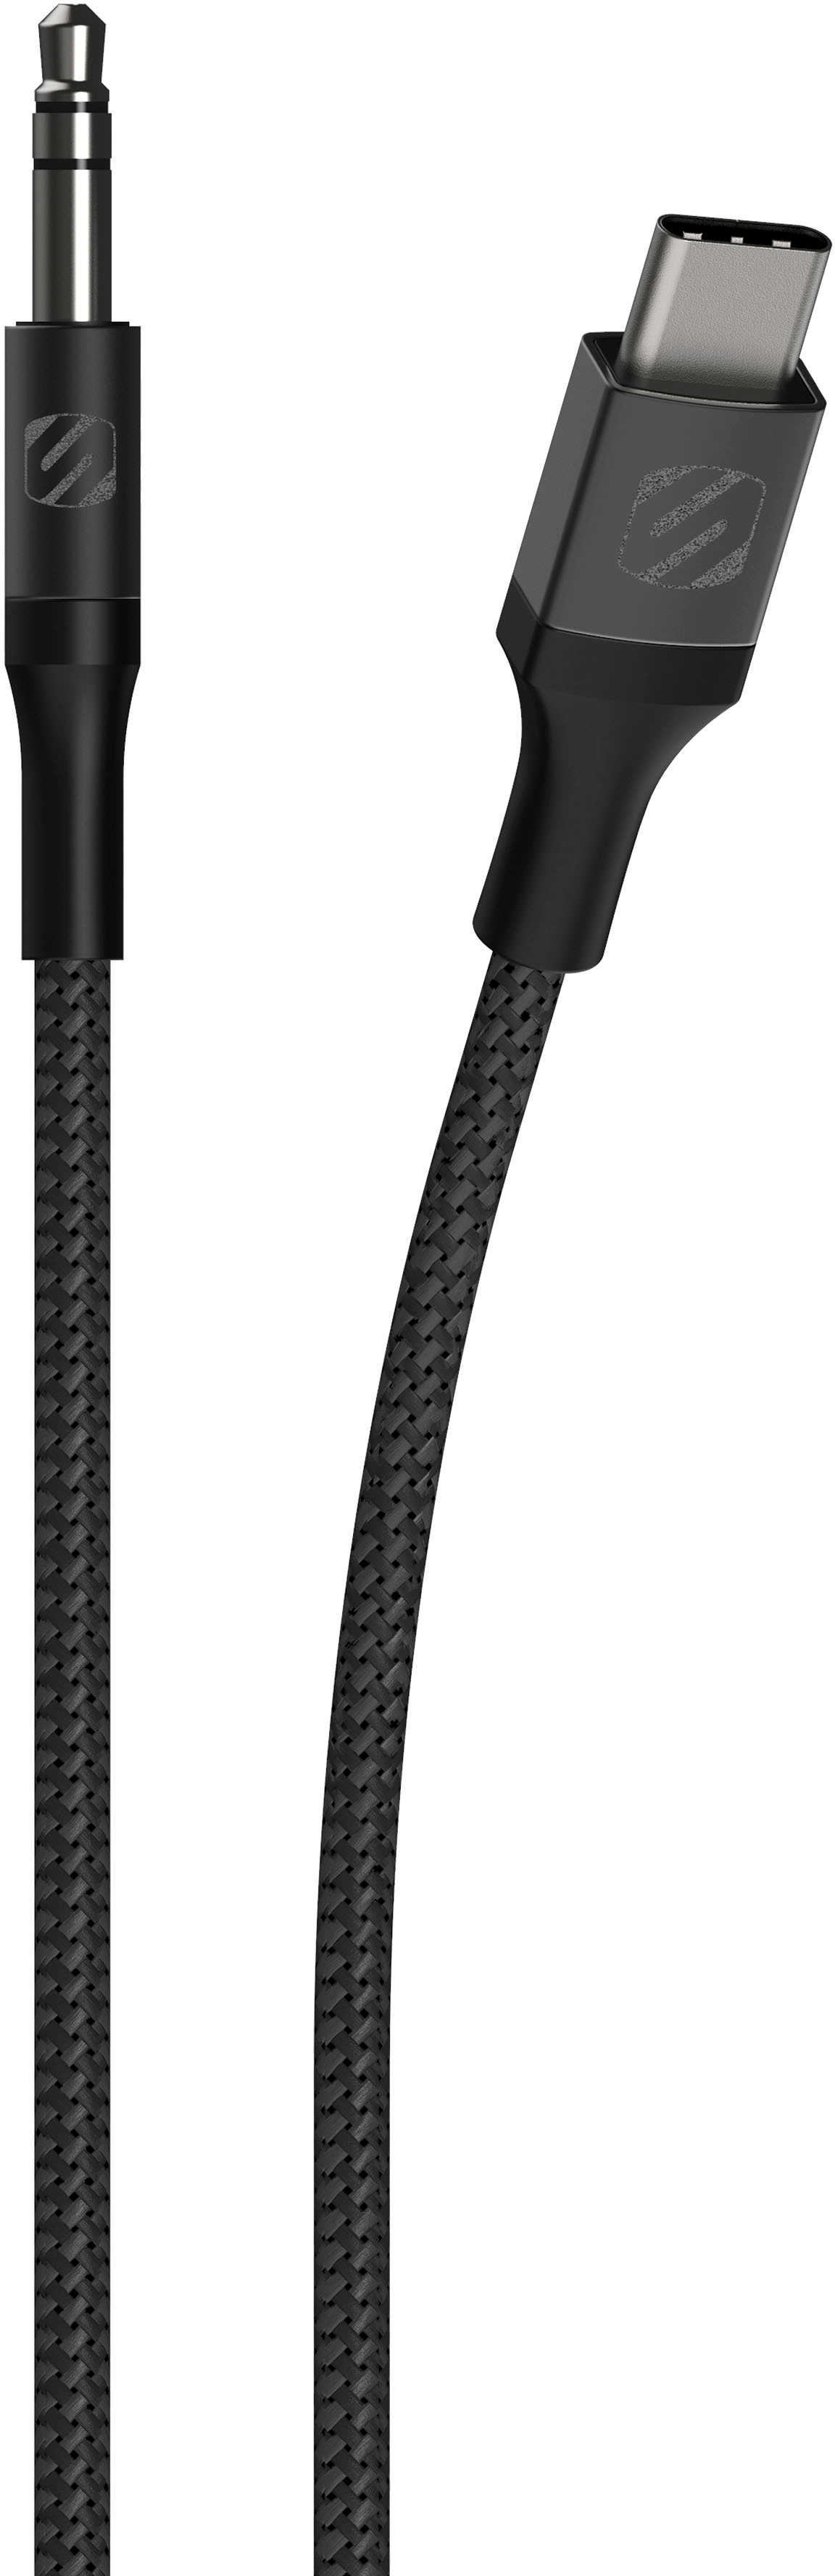 Best Buy essentials™ 6' 3.5mm Male-to-Female Audio Extension Cable Black  BE-HCL310 - Best Buy